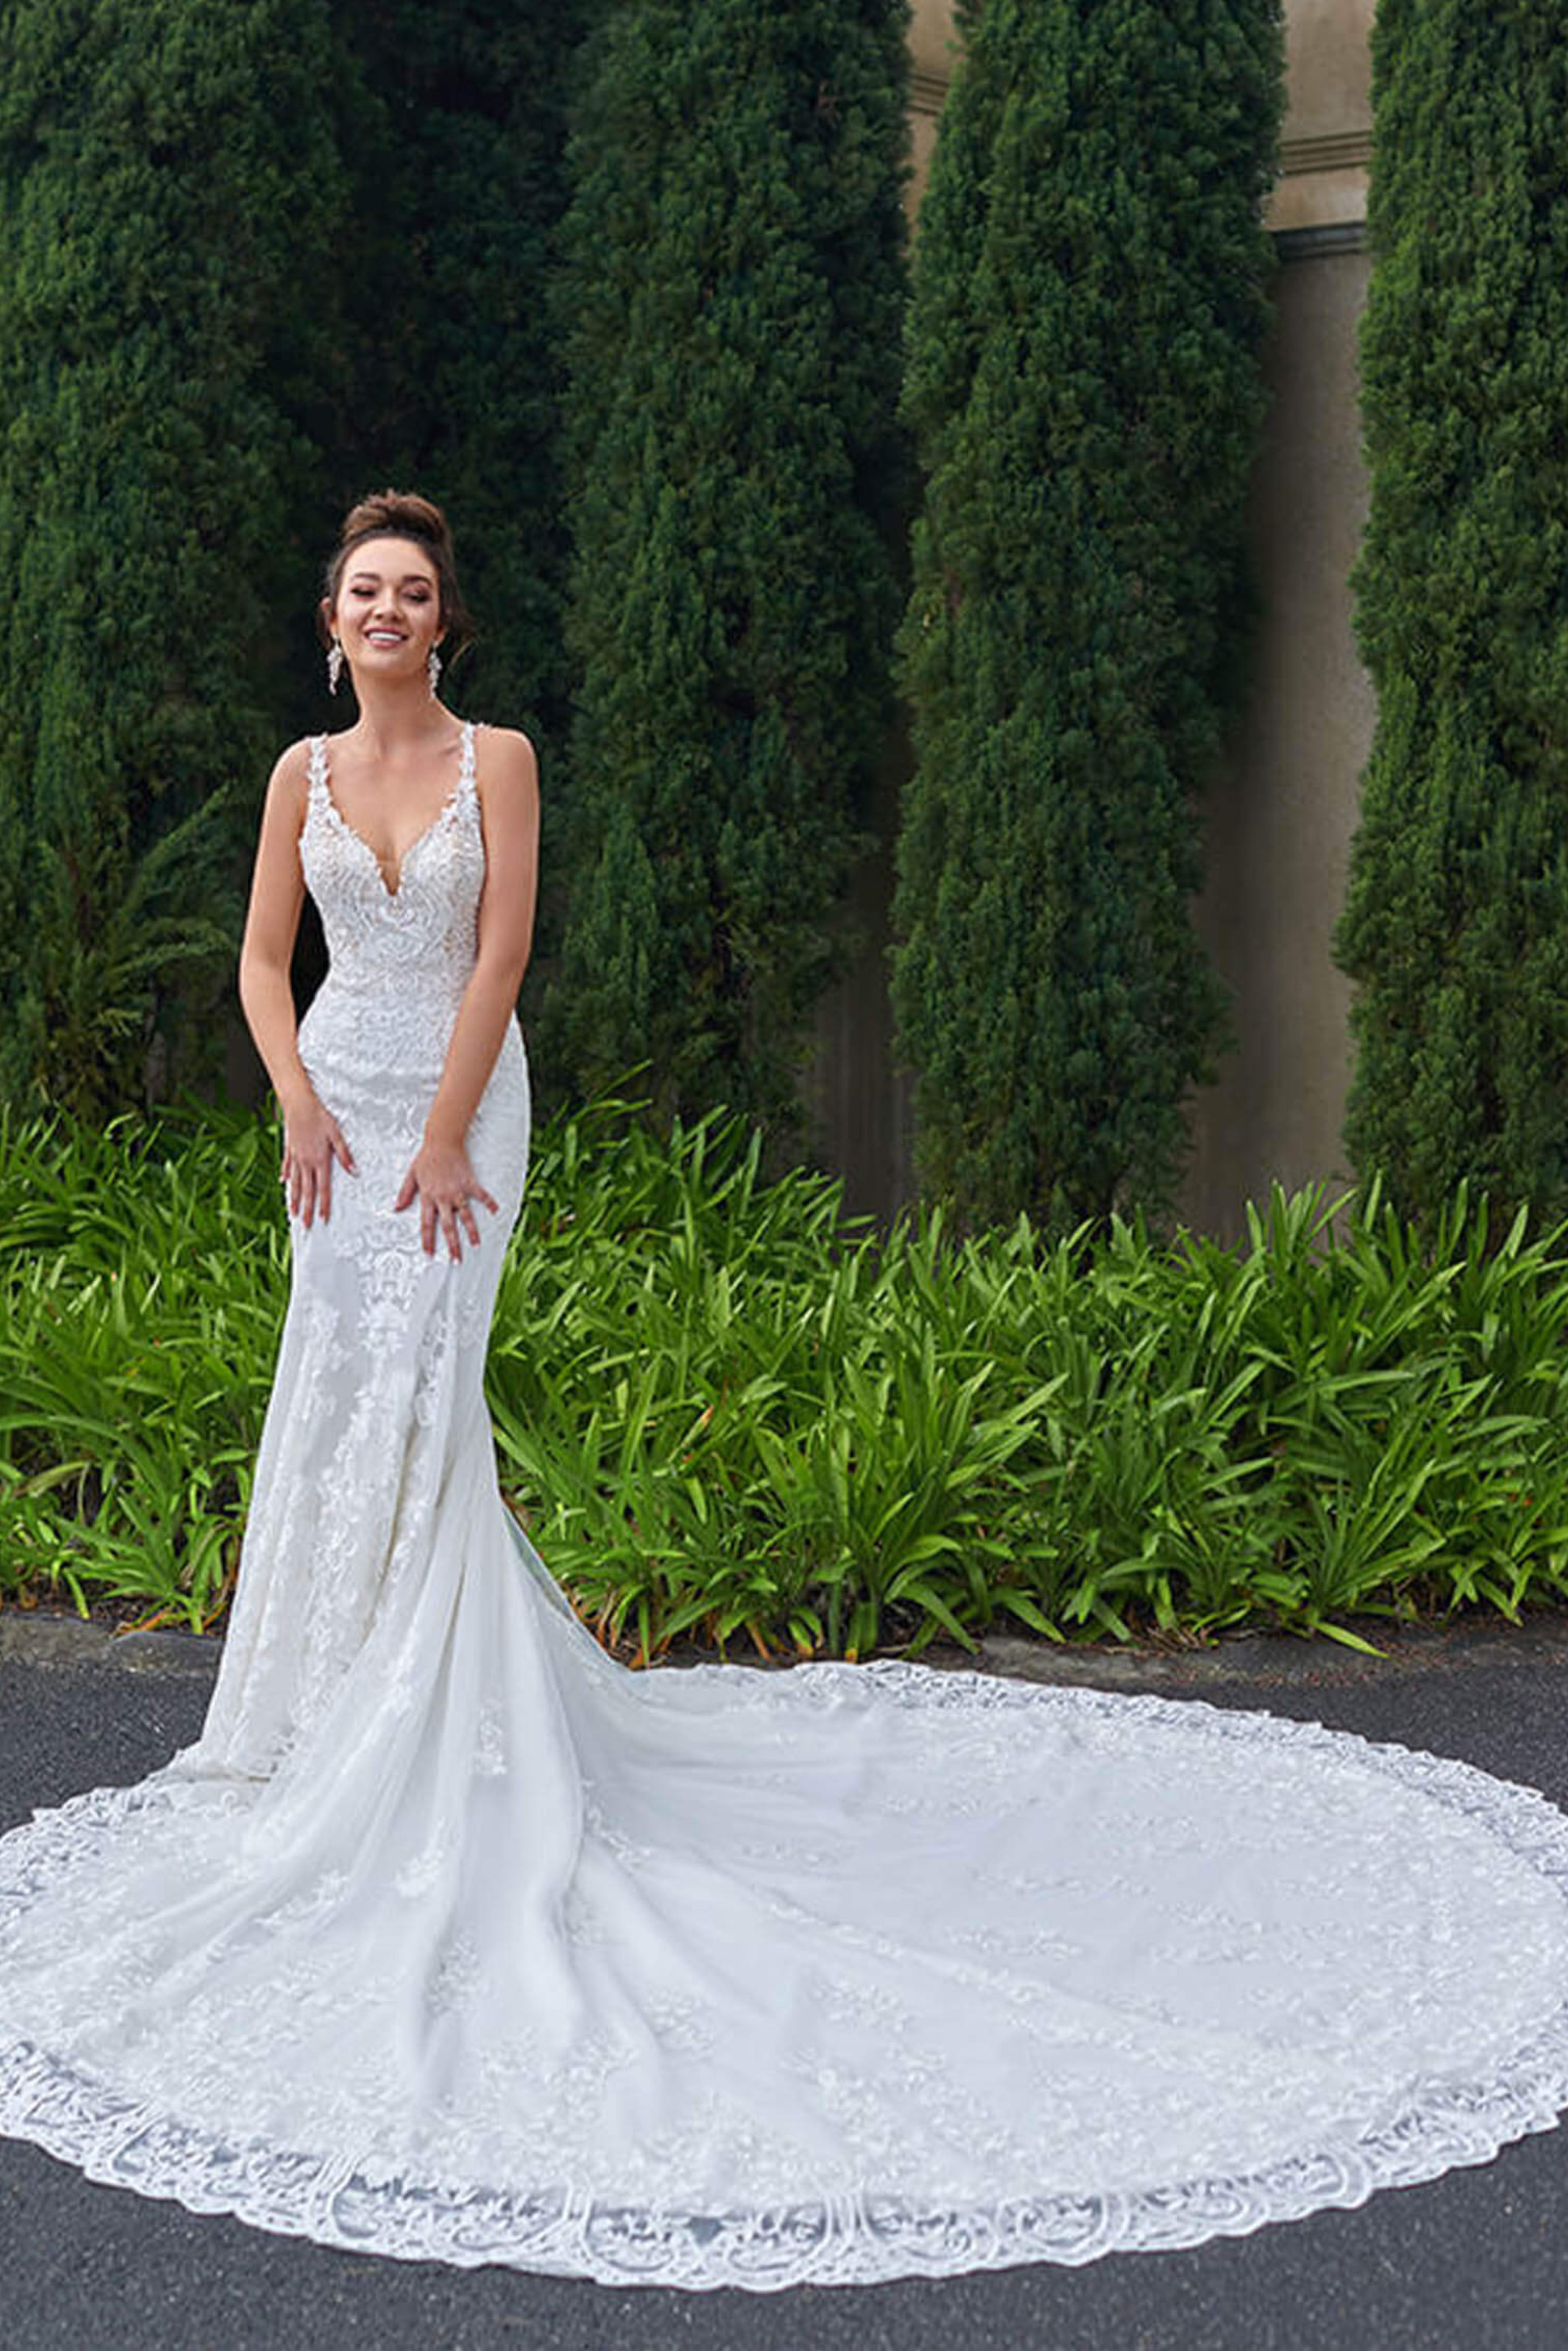 Wedding Gowns Online Shopping for Women at Low Prices